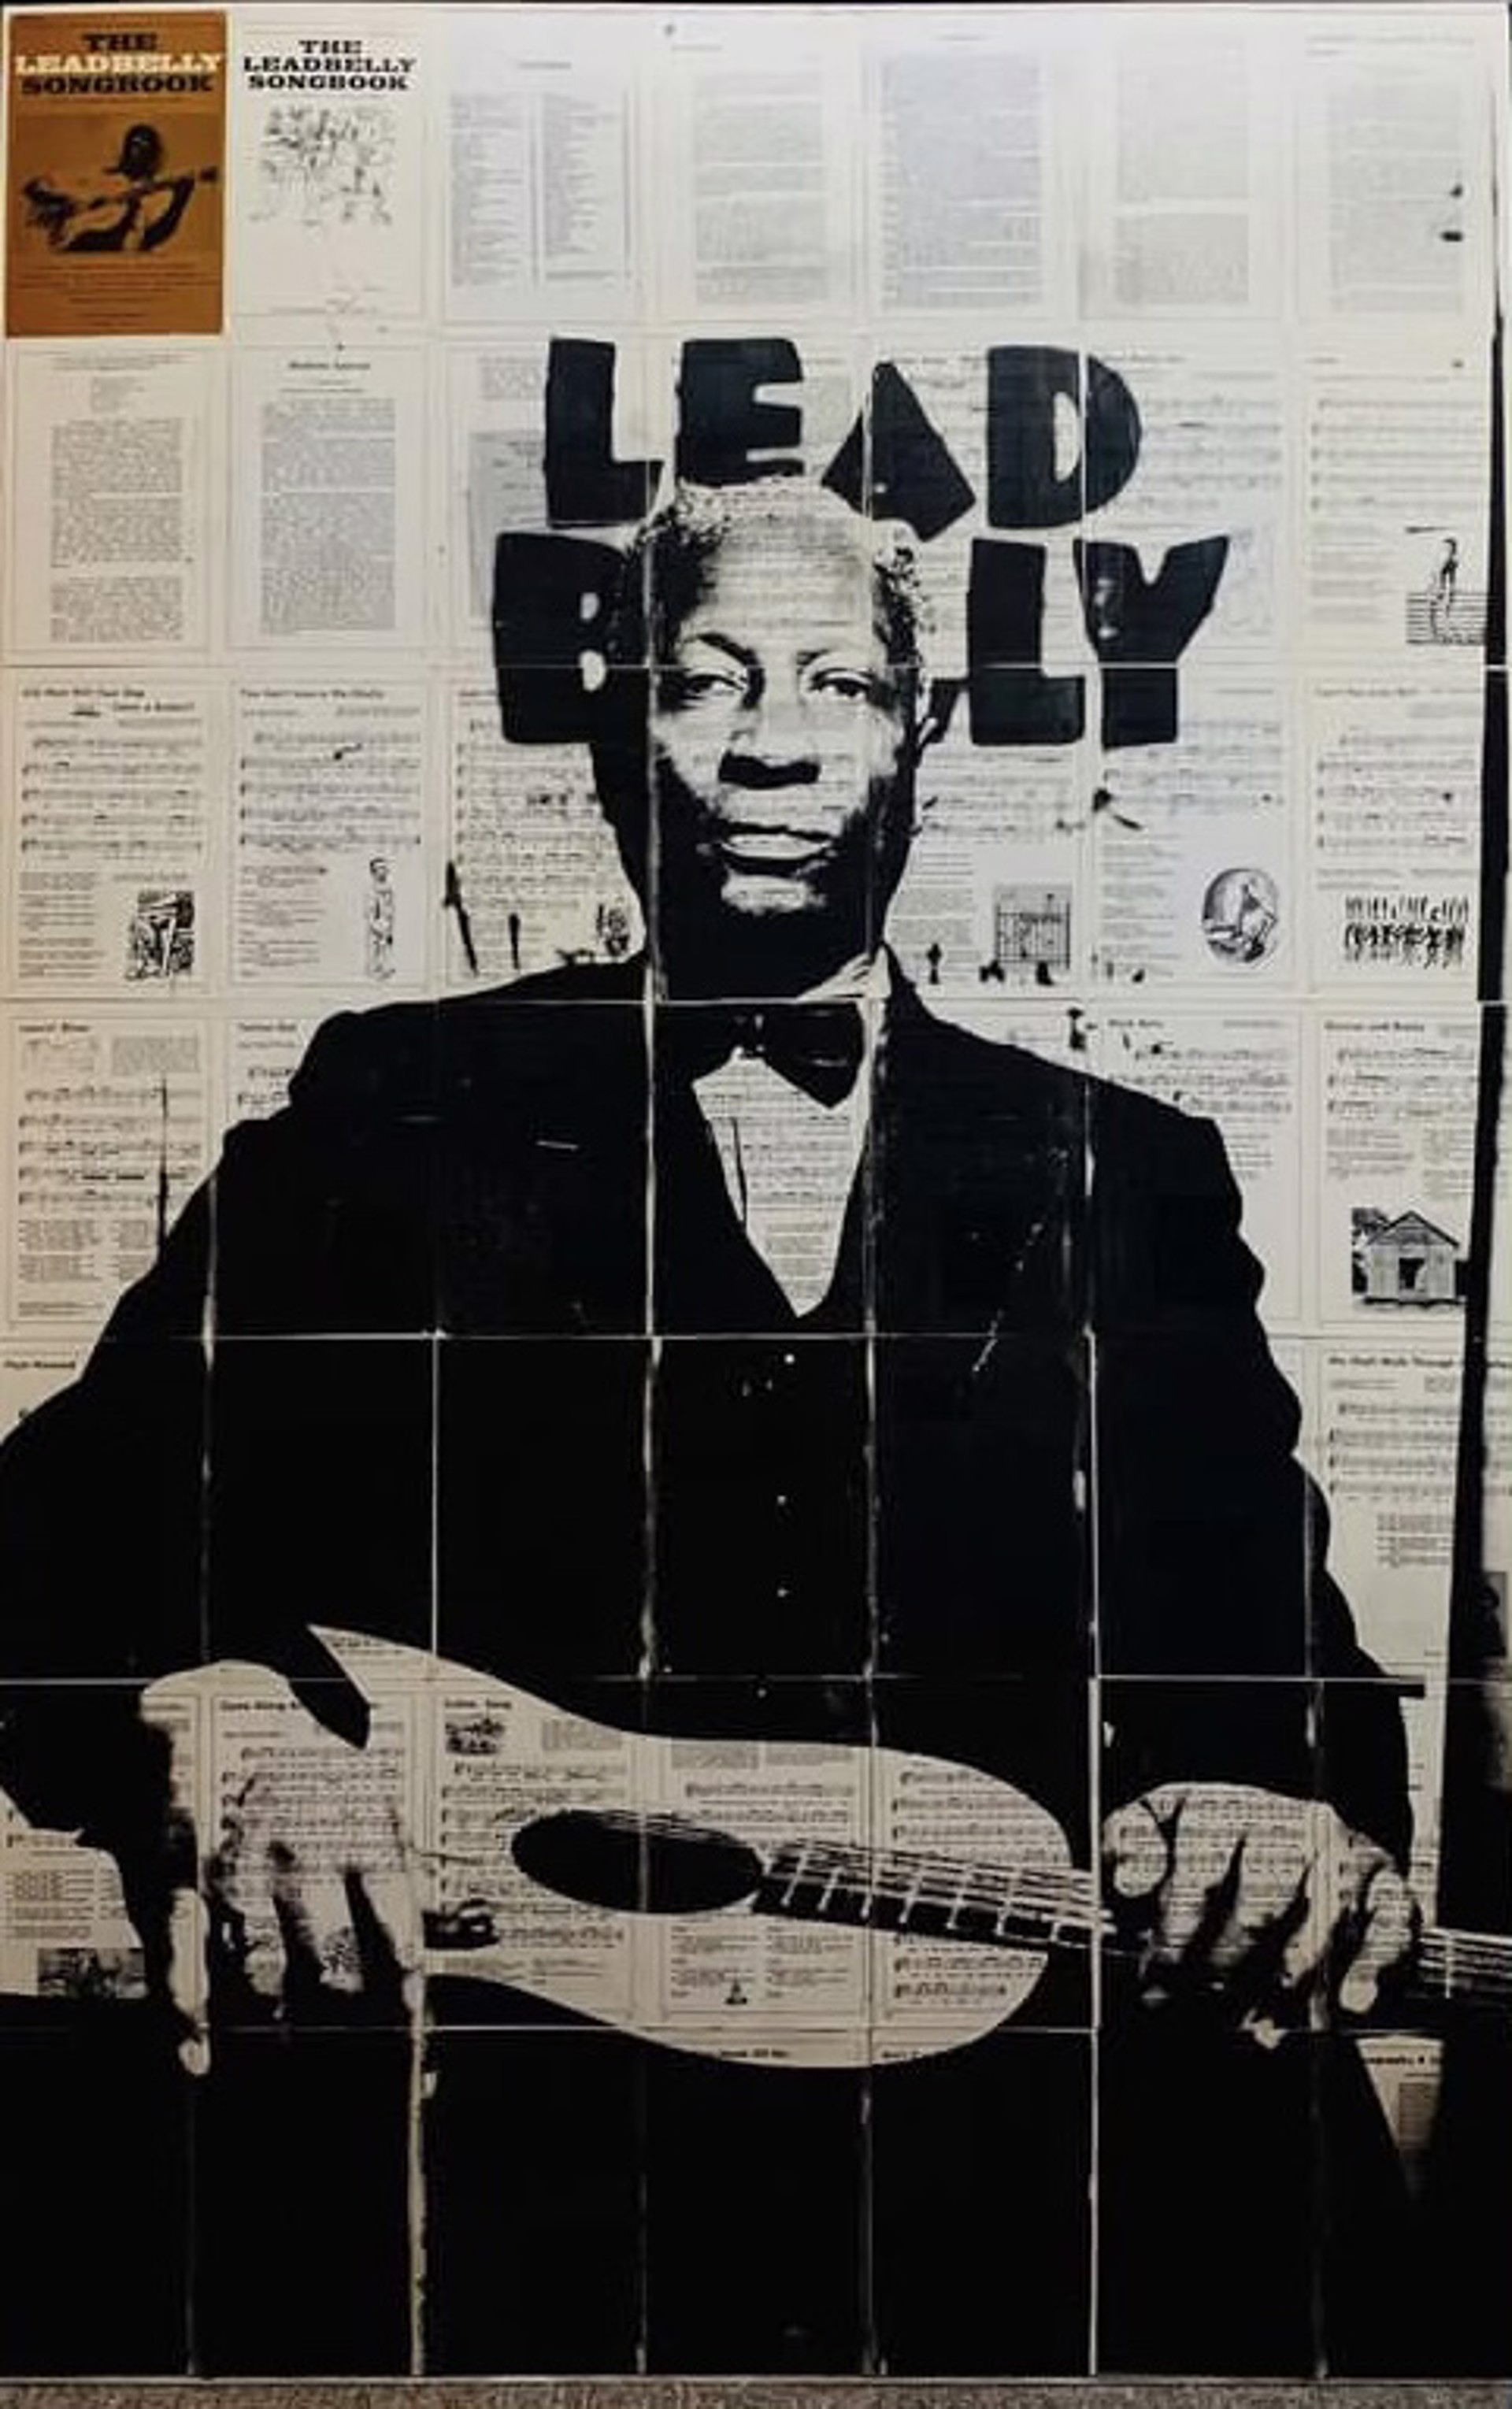 LeadBelly by Mike Saijo